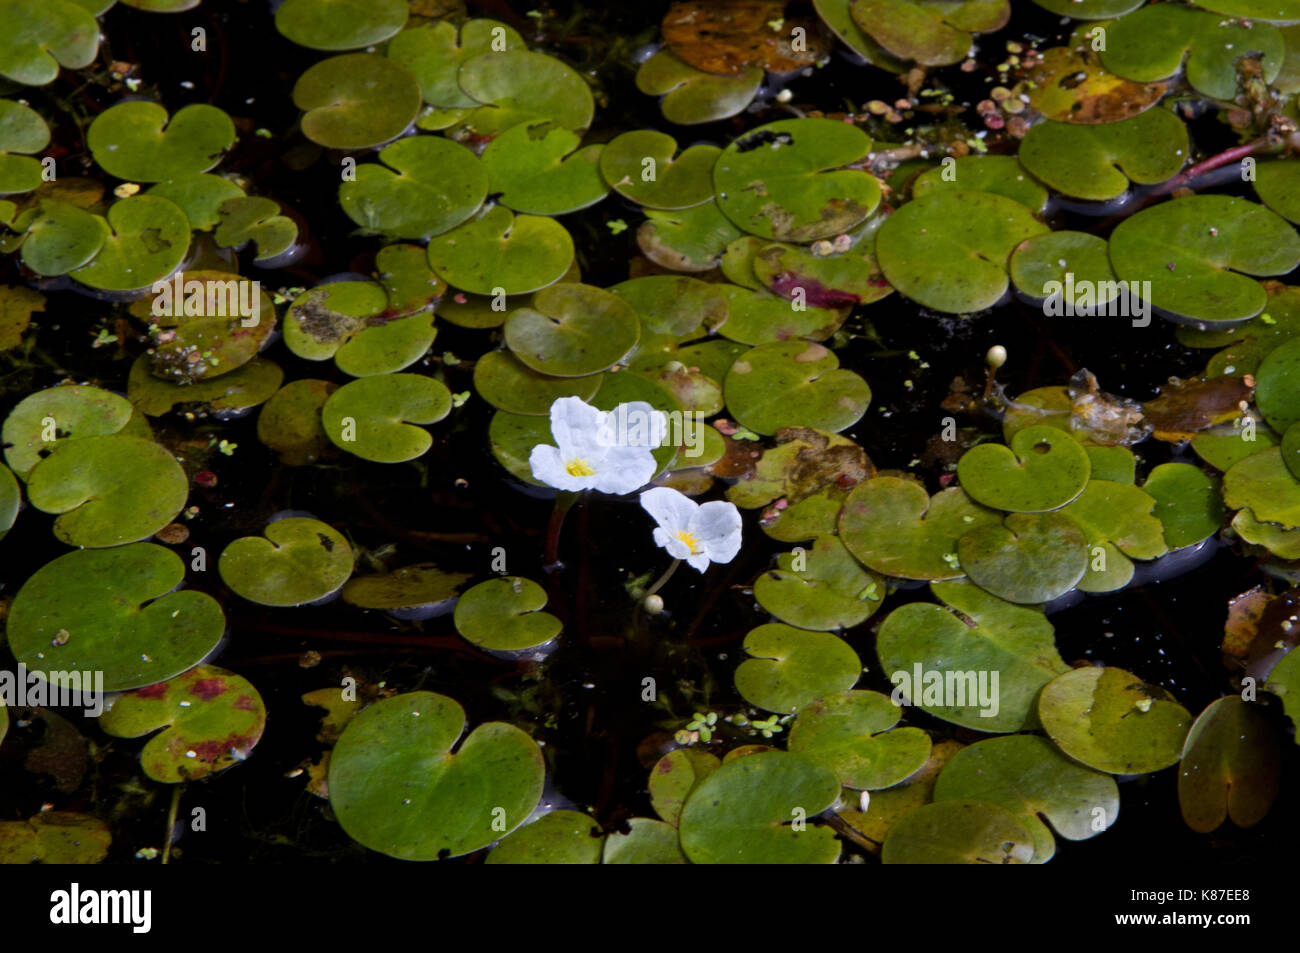 Leaves and white flowers of Frogbit floating on dark water Stock Photo